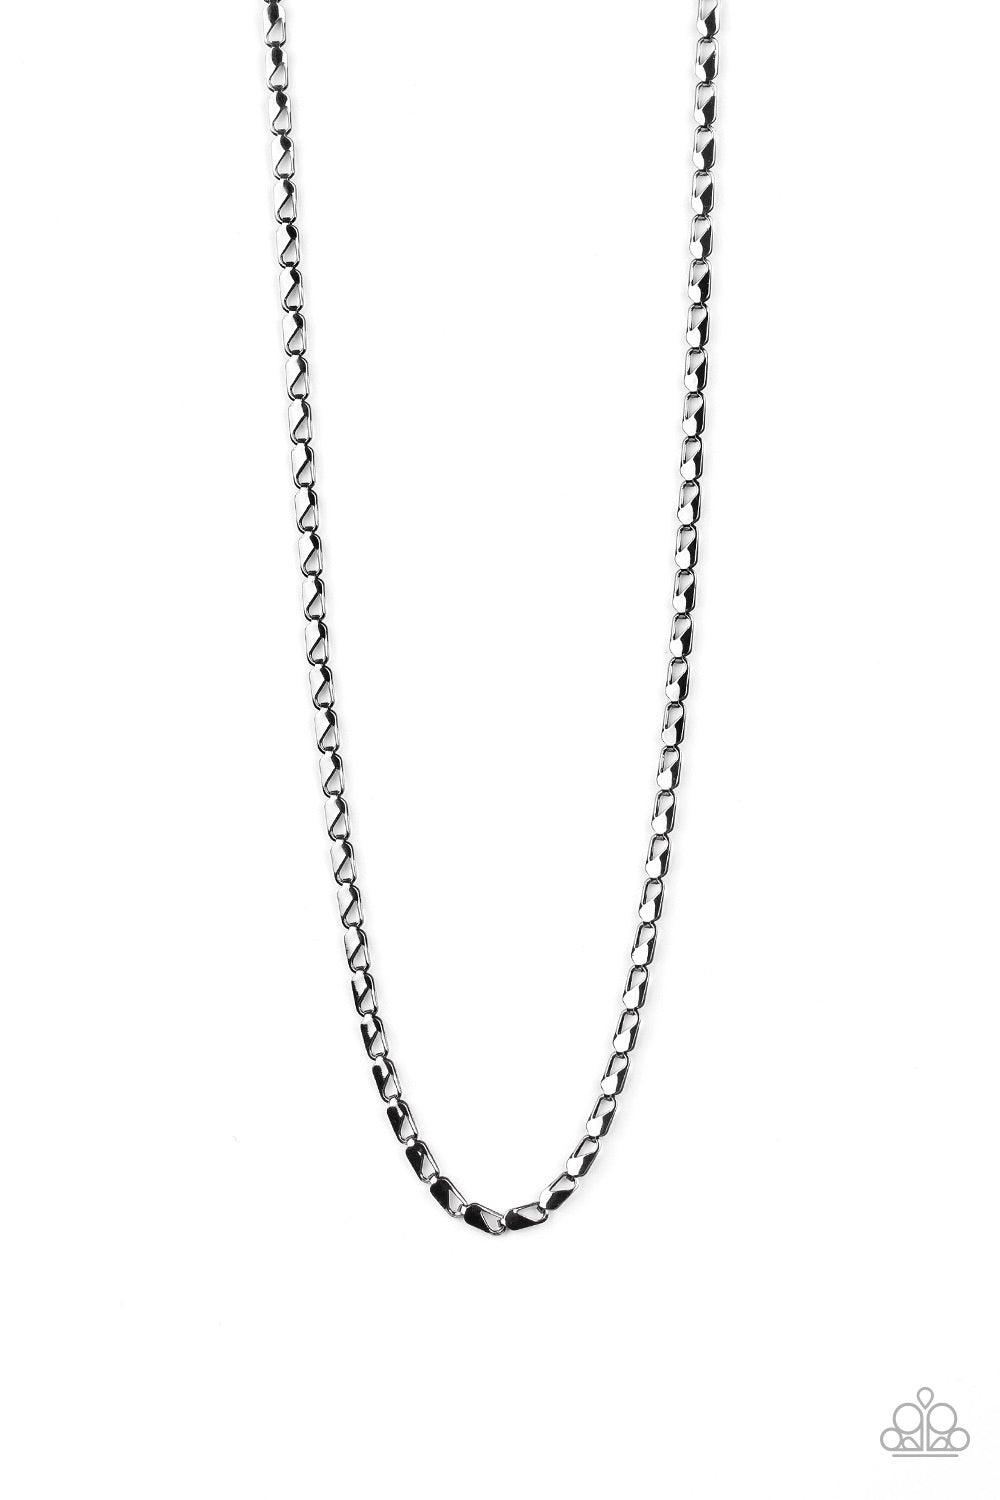 Paparazzi Accessories Free Agency - Black Featuring clasp-like links, an ornate gunmetal chain drapes across the chest for a causal look. Features an adjustable clasp closure. Jewelry